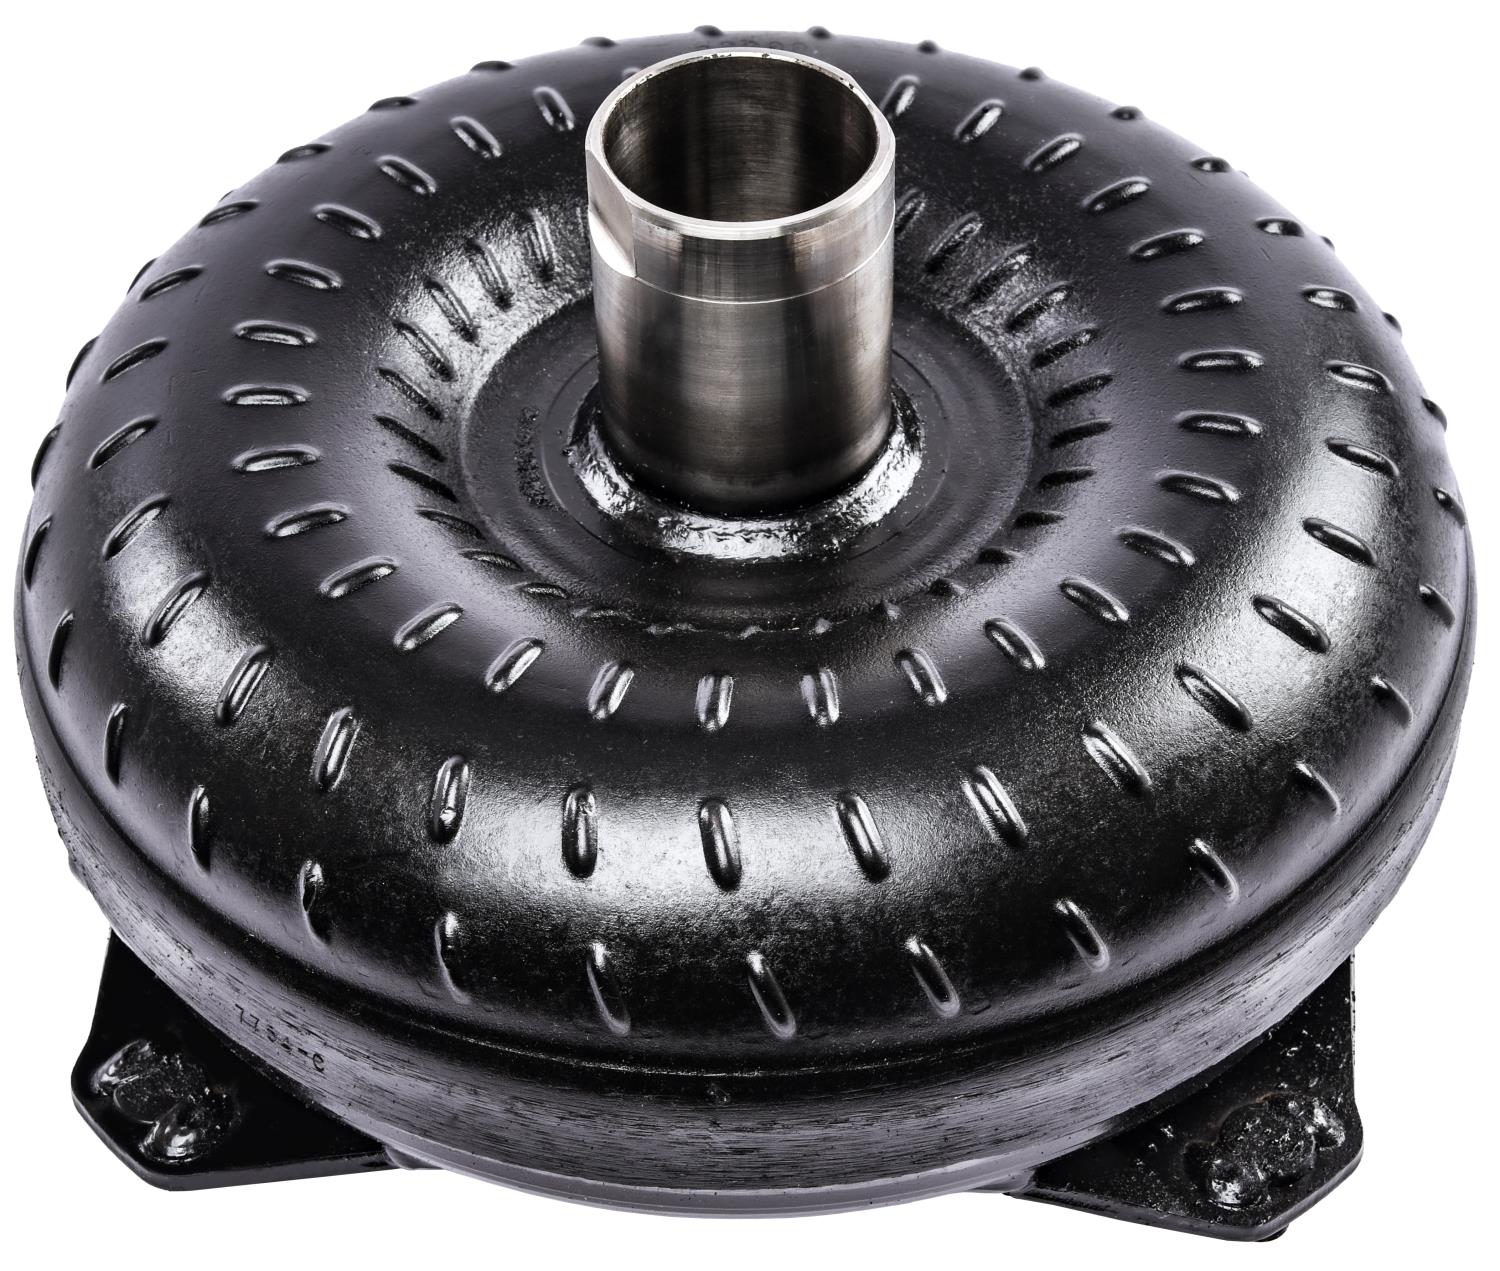 Torque Converter for Ford C4 [10 in. Dia. & 2600-2900 RPM Stall Speed]